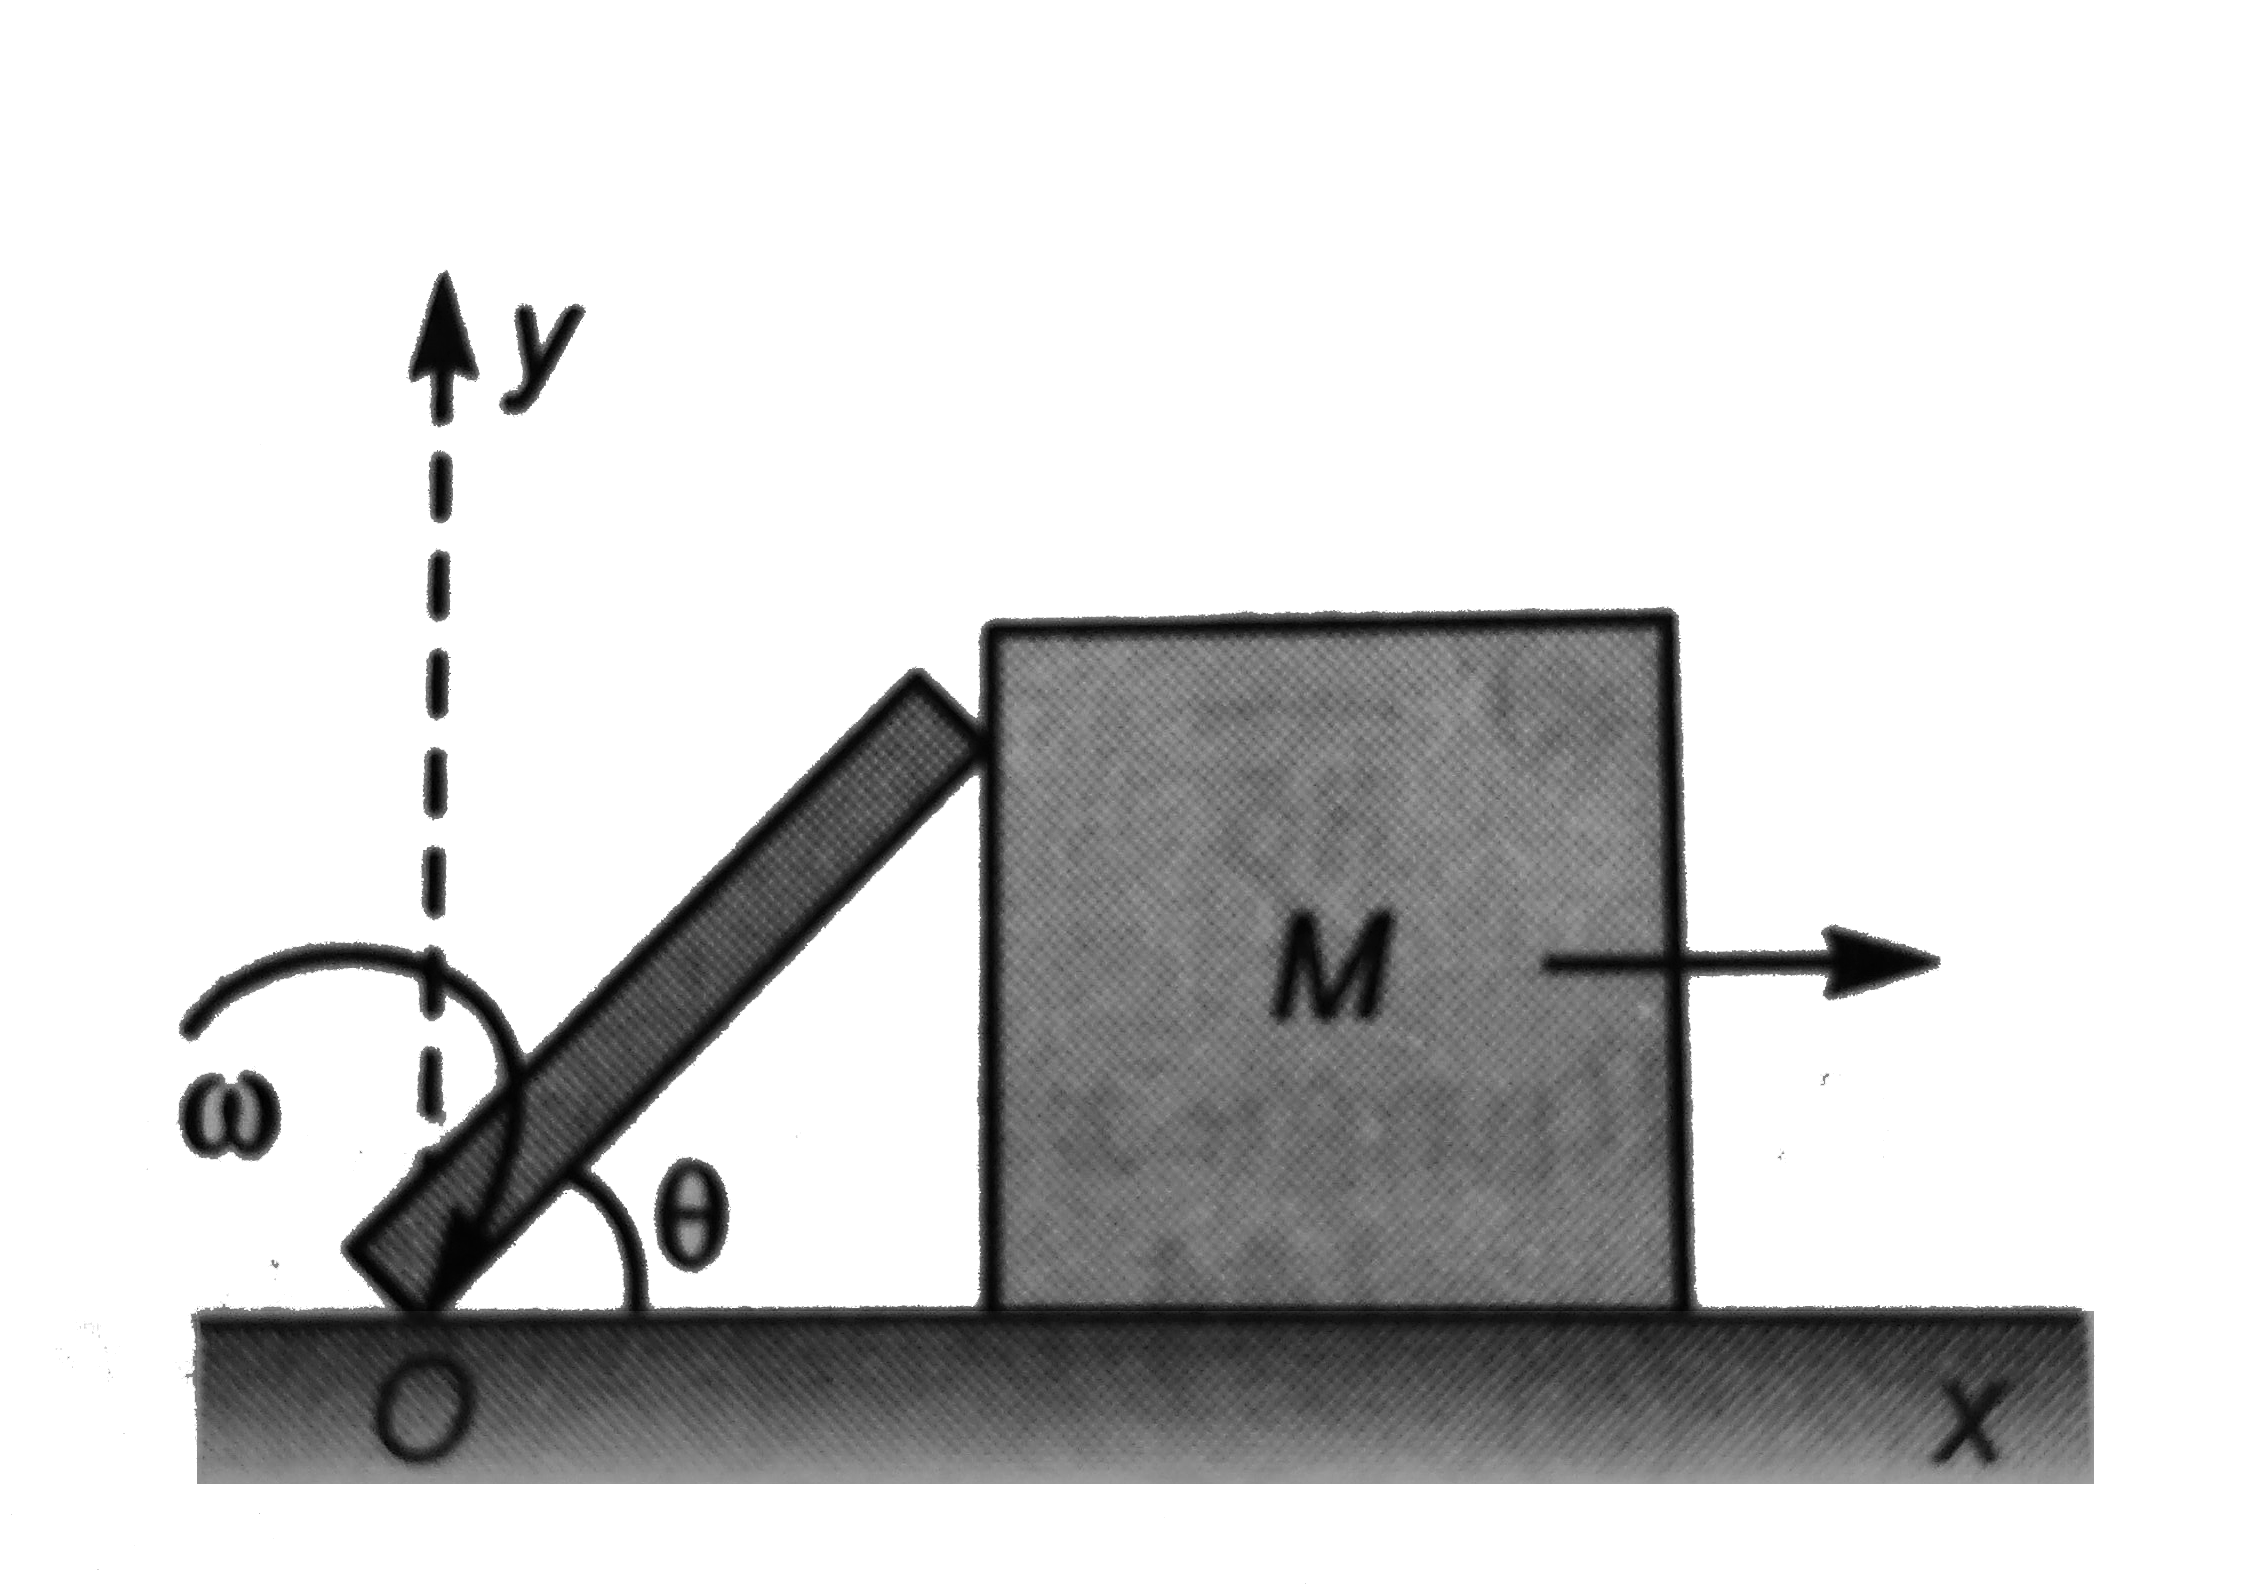 A uniform rod of mass m and length l is applied pivoted at point O. The rod is initially in vertical position and touching a block of mass M which is at rest on a horizontal surface. The rod is given a slight jerk and it starts rotating about point O this causes the block to move forward as shown The rod loses contact with the block at theta=30^(@) all surfaces are smooth now answer the following questions.   Q. The acceleration of centre of mass of rod, when it loses contact with the block is